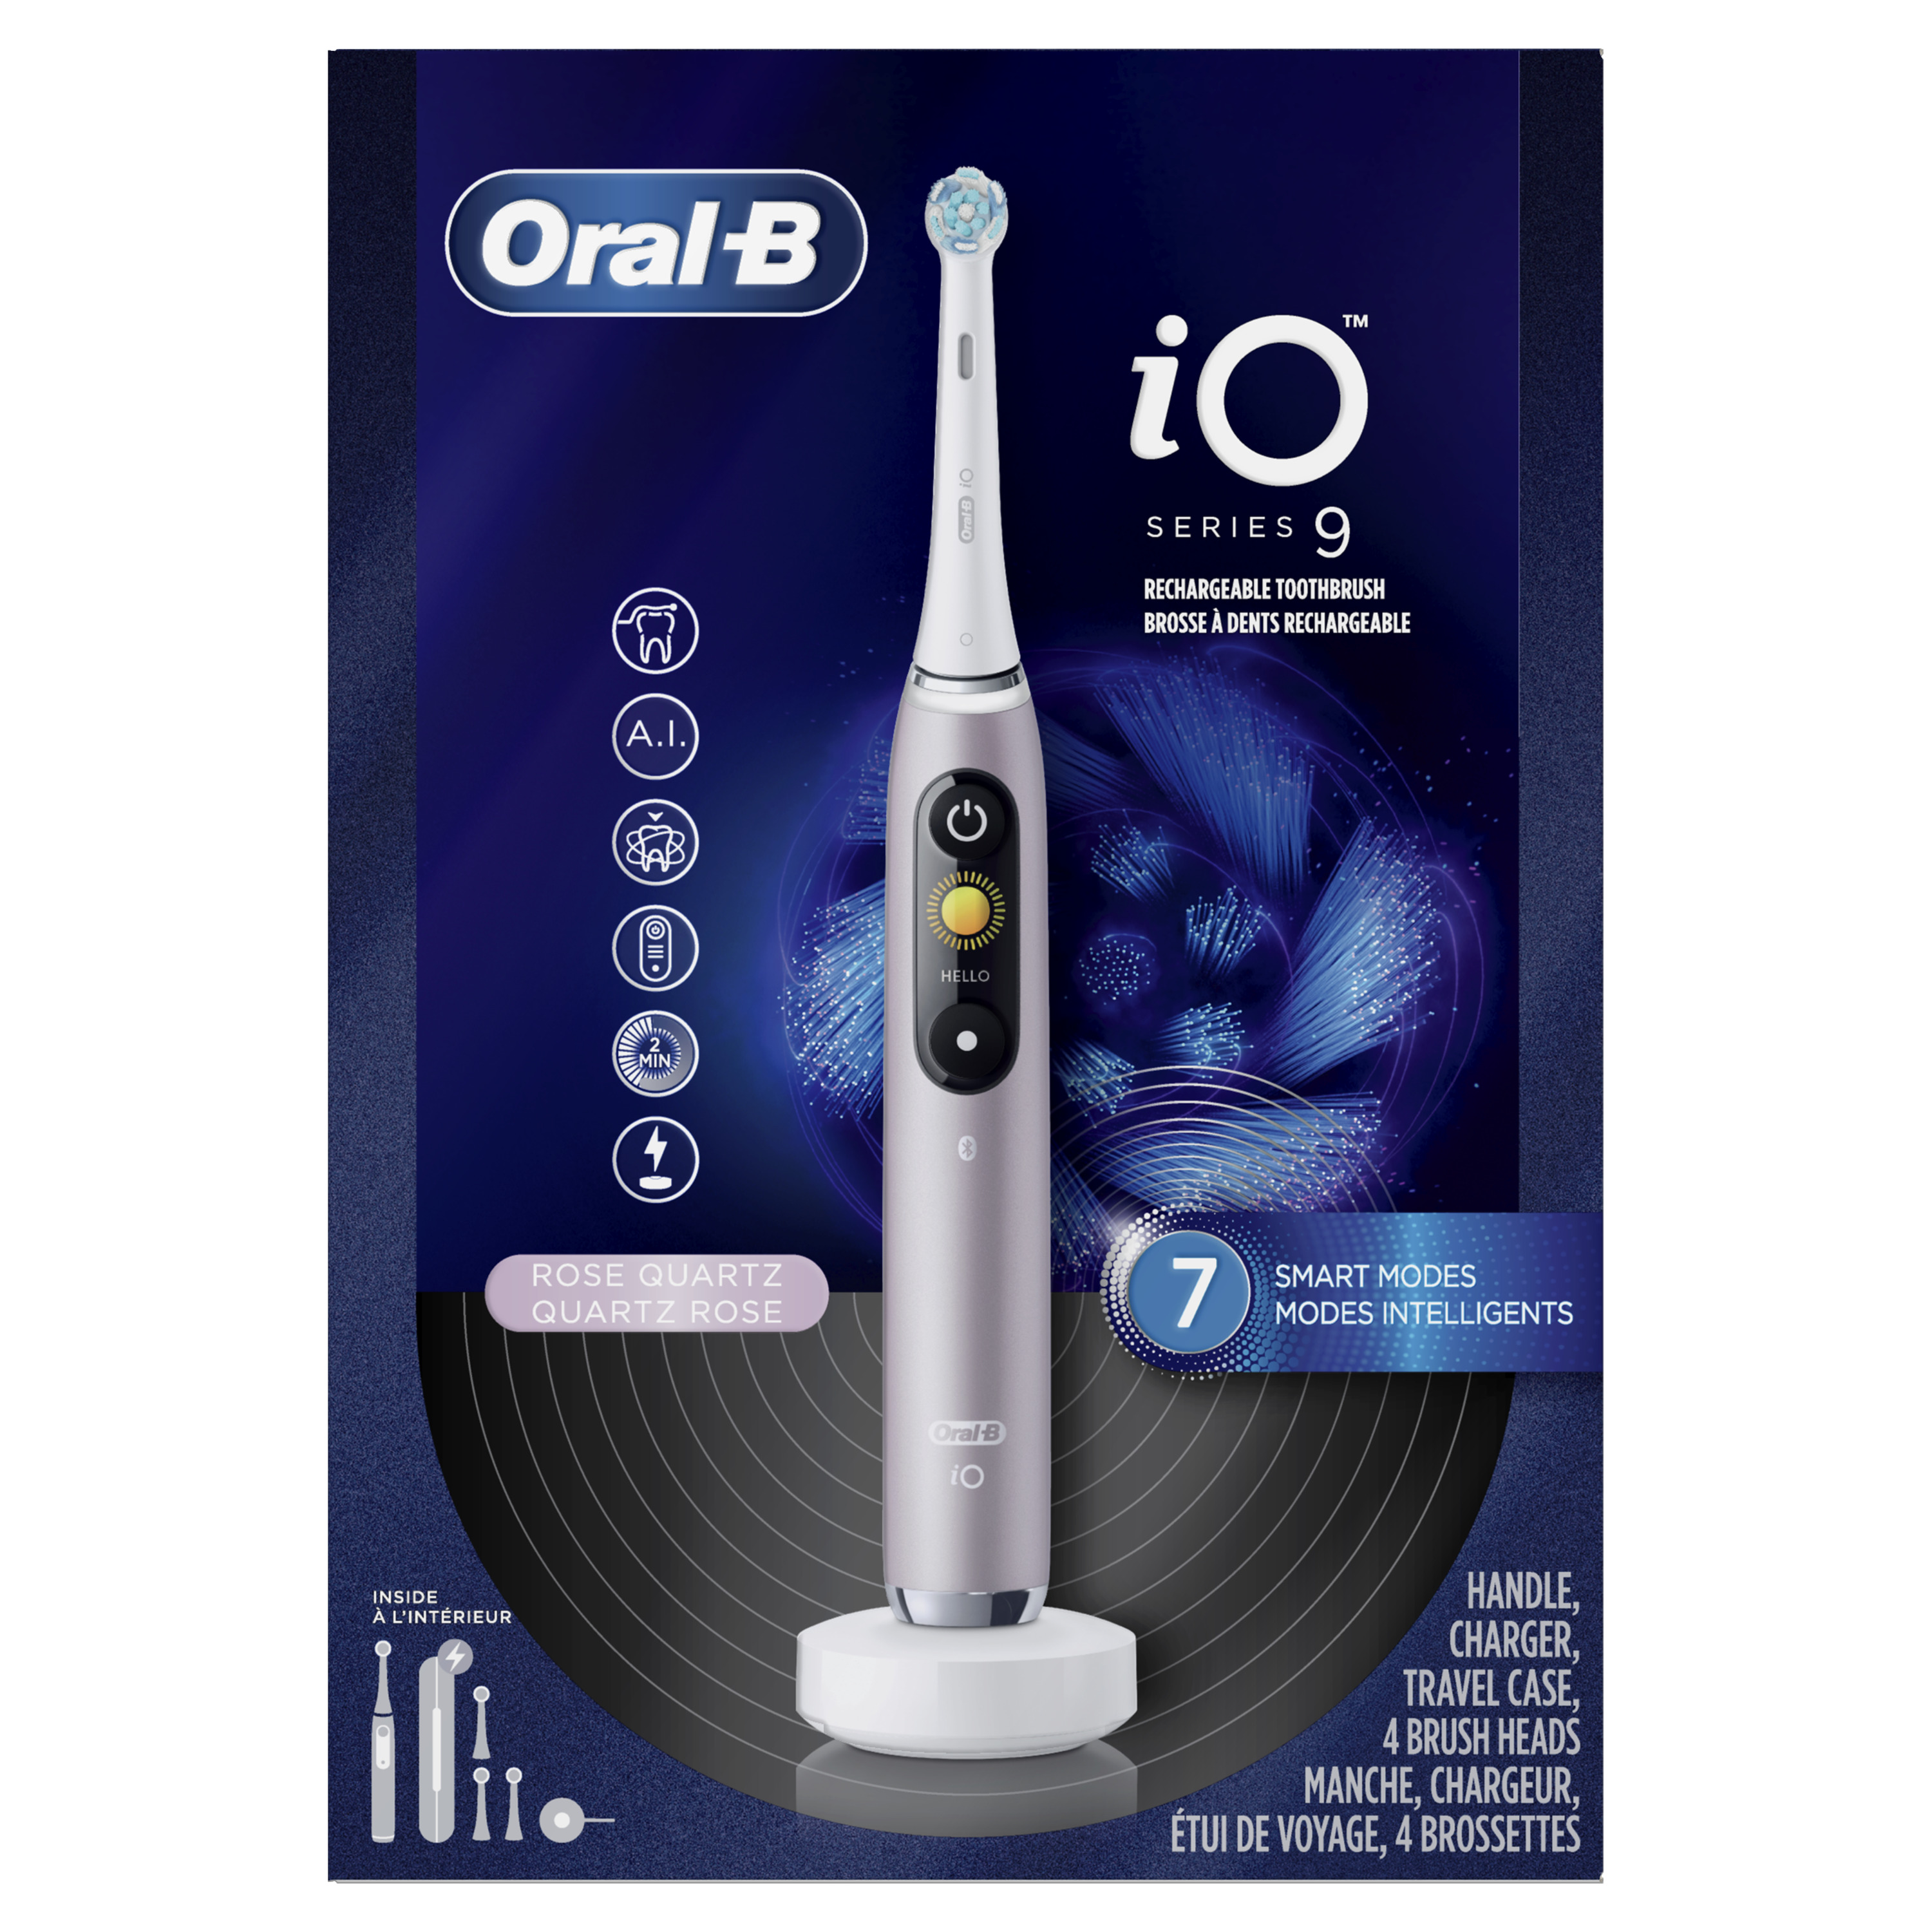 Oral-B iO Series 9 Electric Toothbrush with 4 Brush Heads, Rose Quartz - image 4 of 15